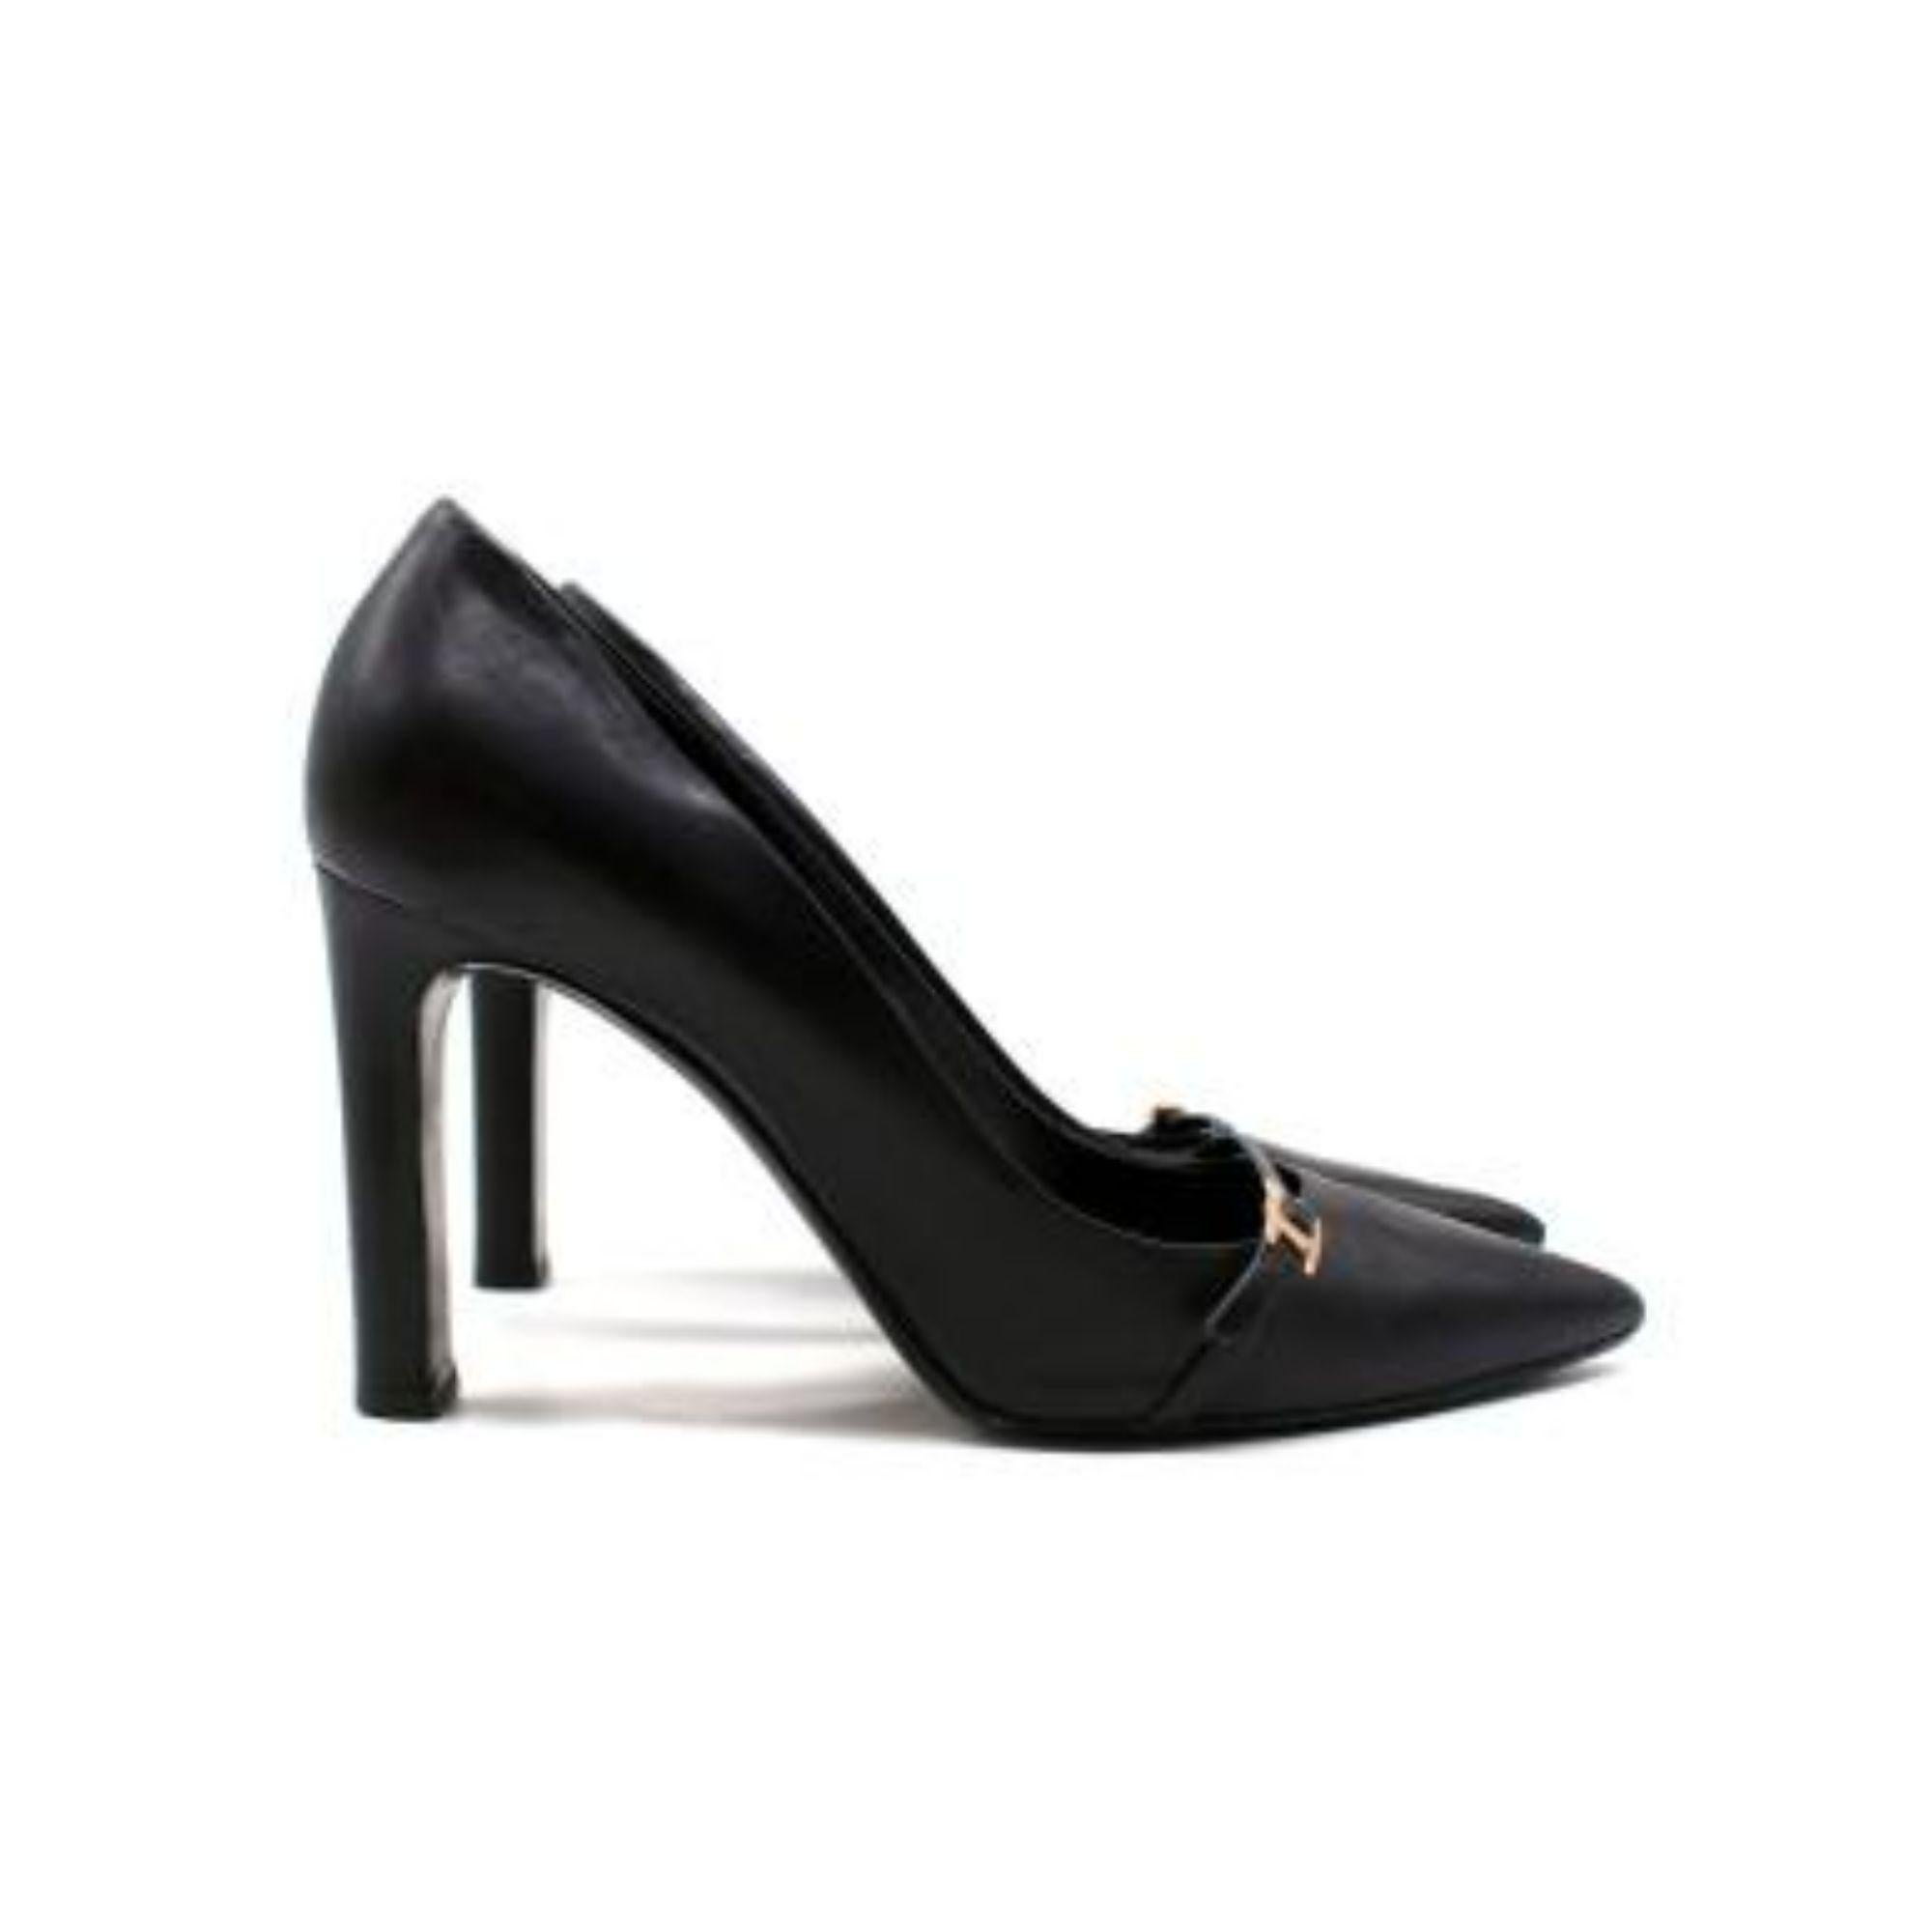 Hermes Hapi Buckle Black Leather Point Toe Pumps In Good Condition For Sale In London, GB